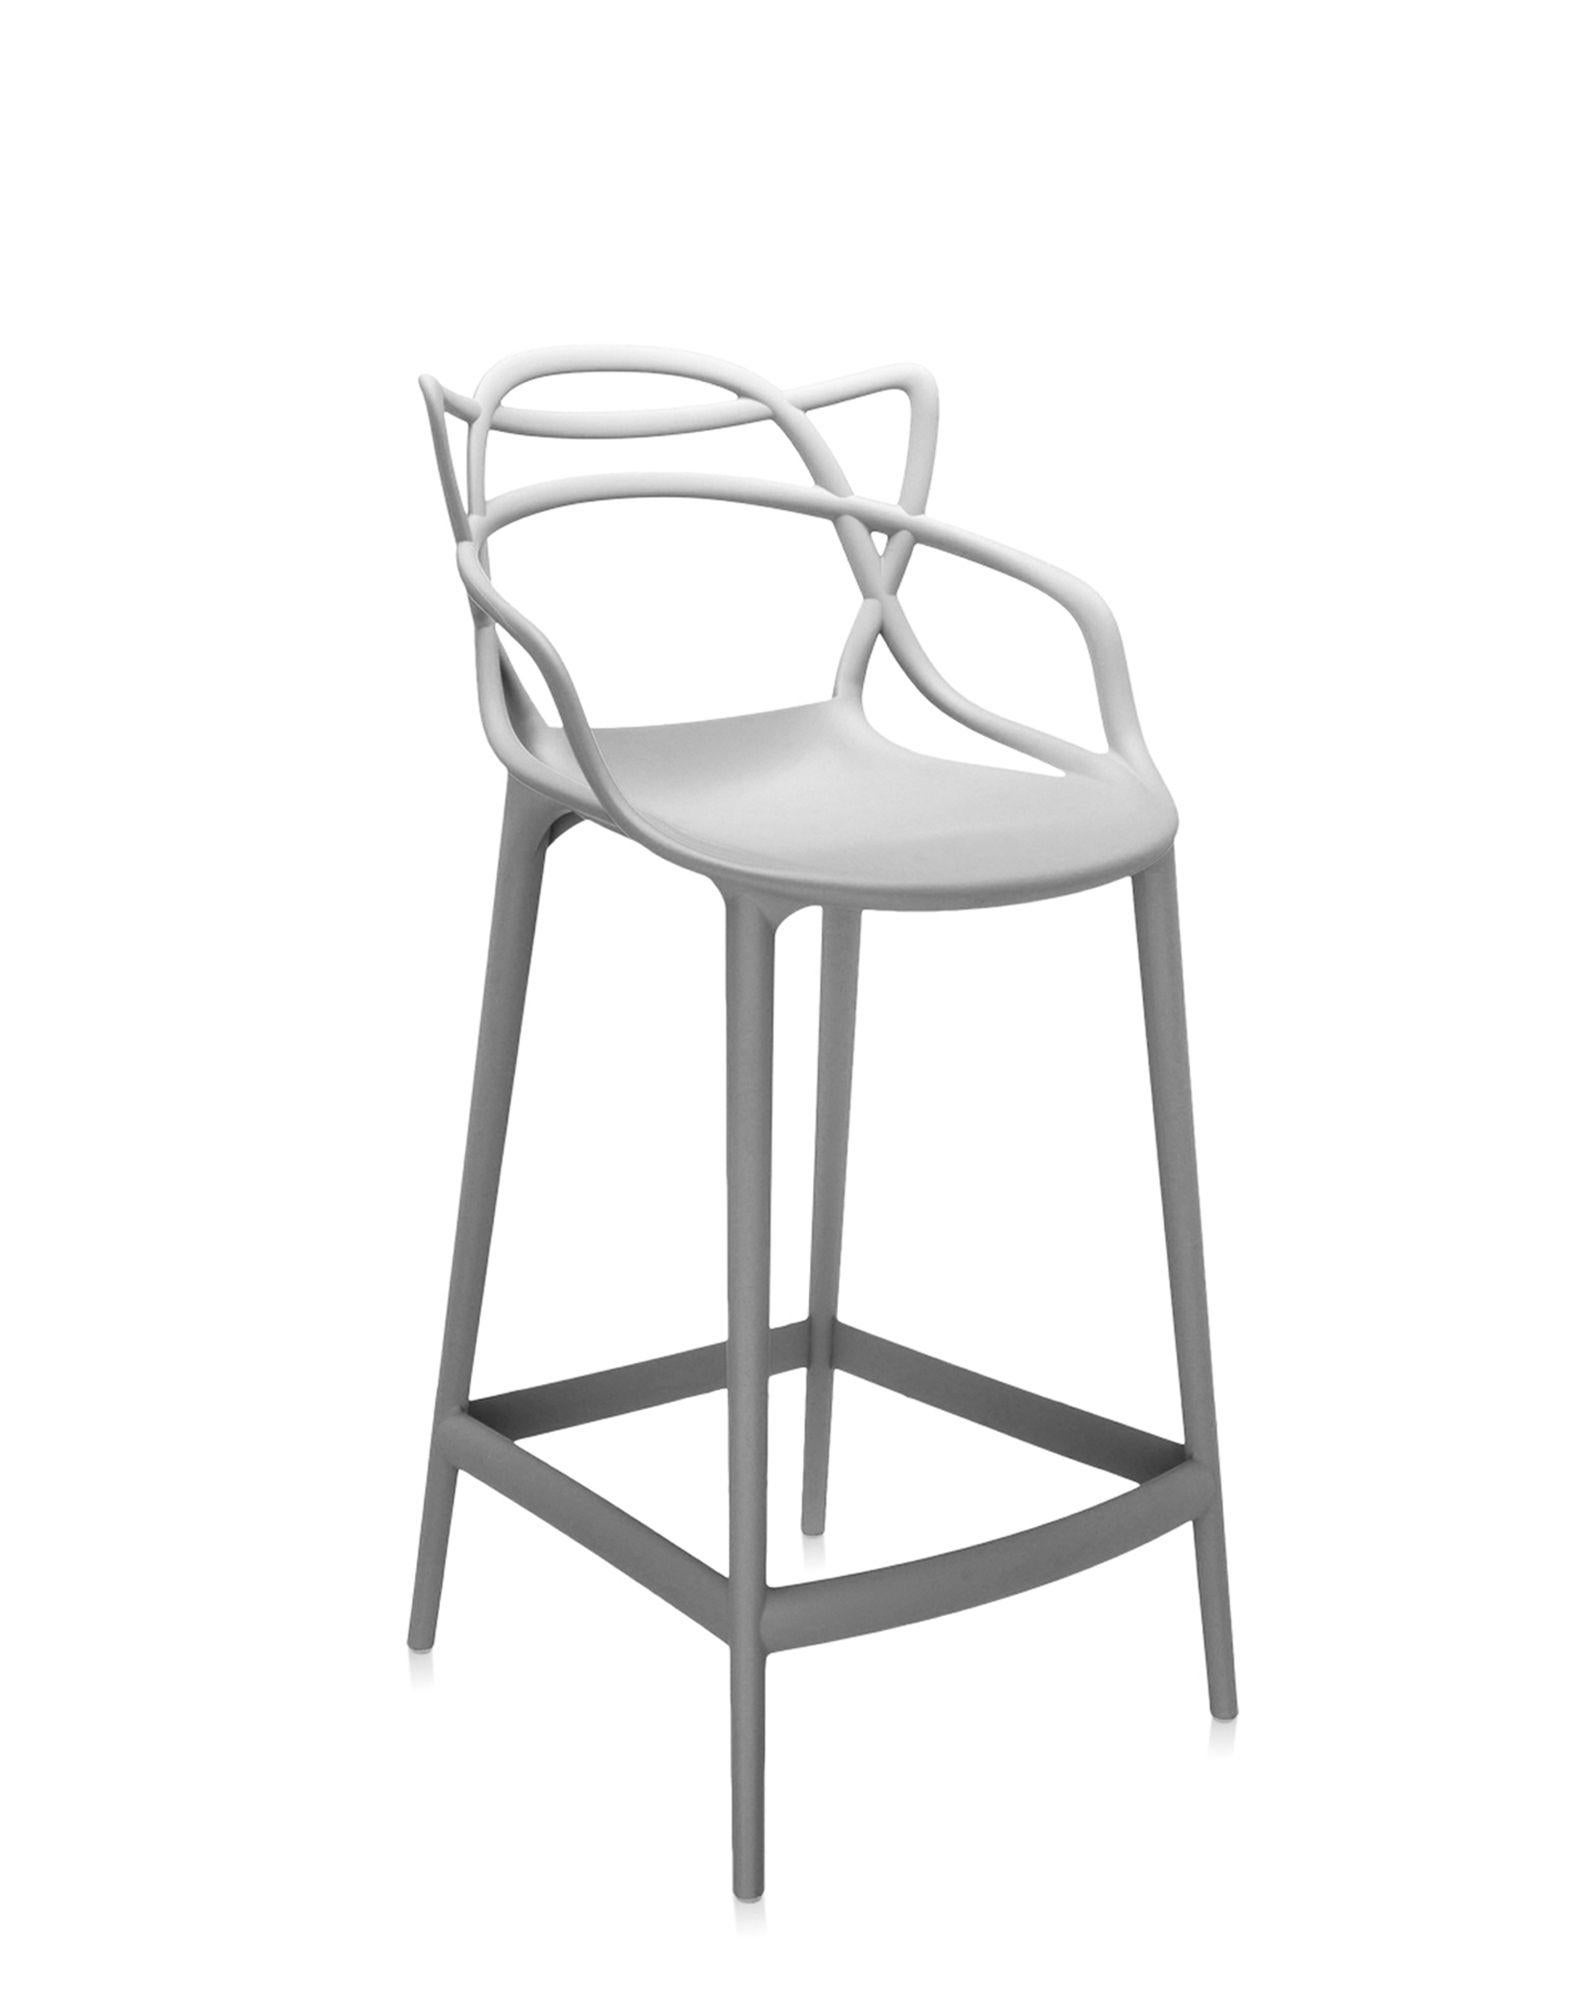 Kartell also offers a stool version of the Masters chair, winner of the Good Design Award 2010 and the Red Dot Award 2013, and a worldwide best seller. The legs are lengthened and the seat is shrunk, but the frame's unmistakable graphic look,